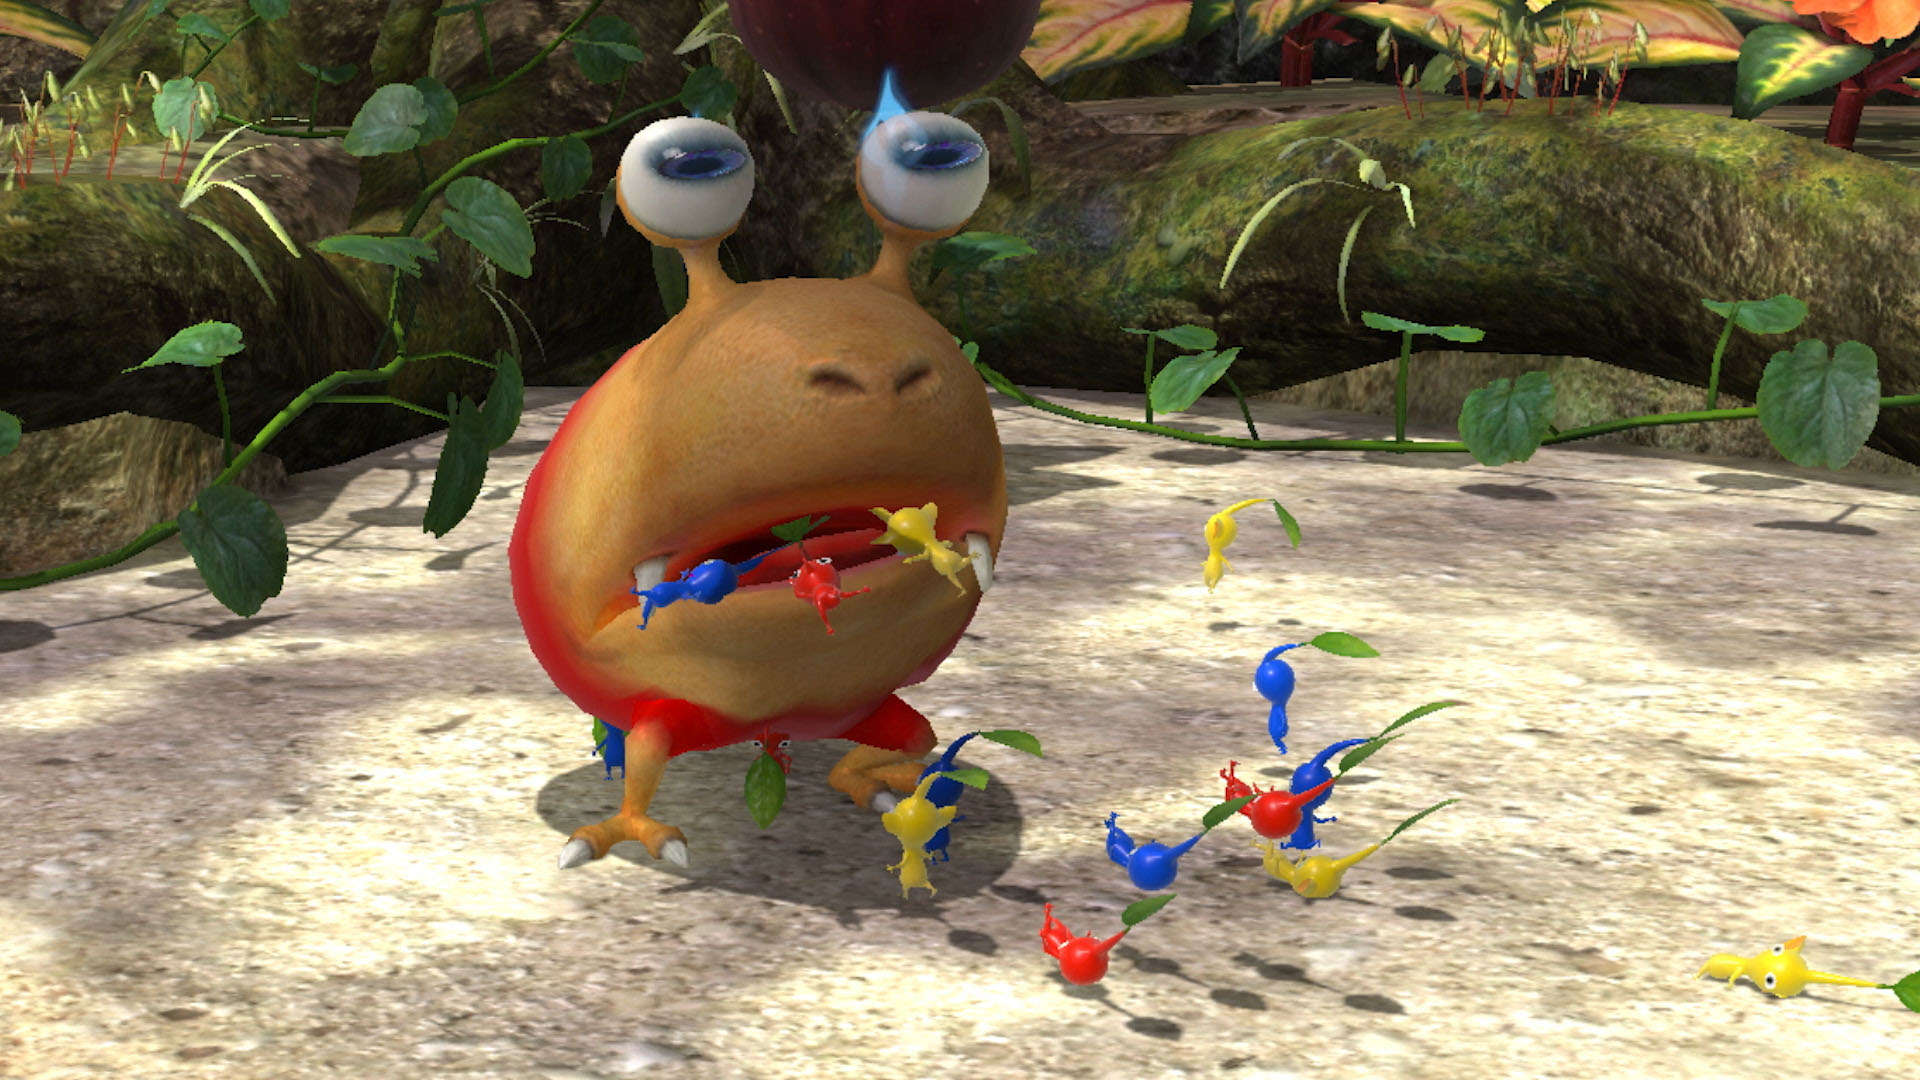 pikmin deluxe switch